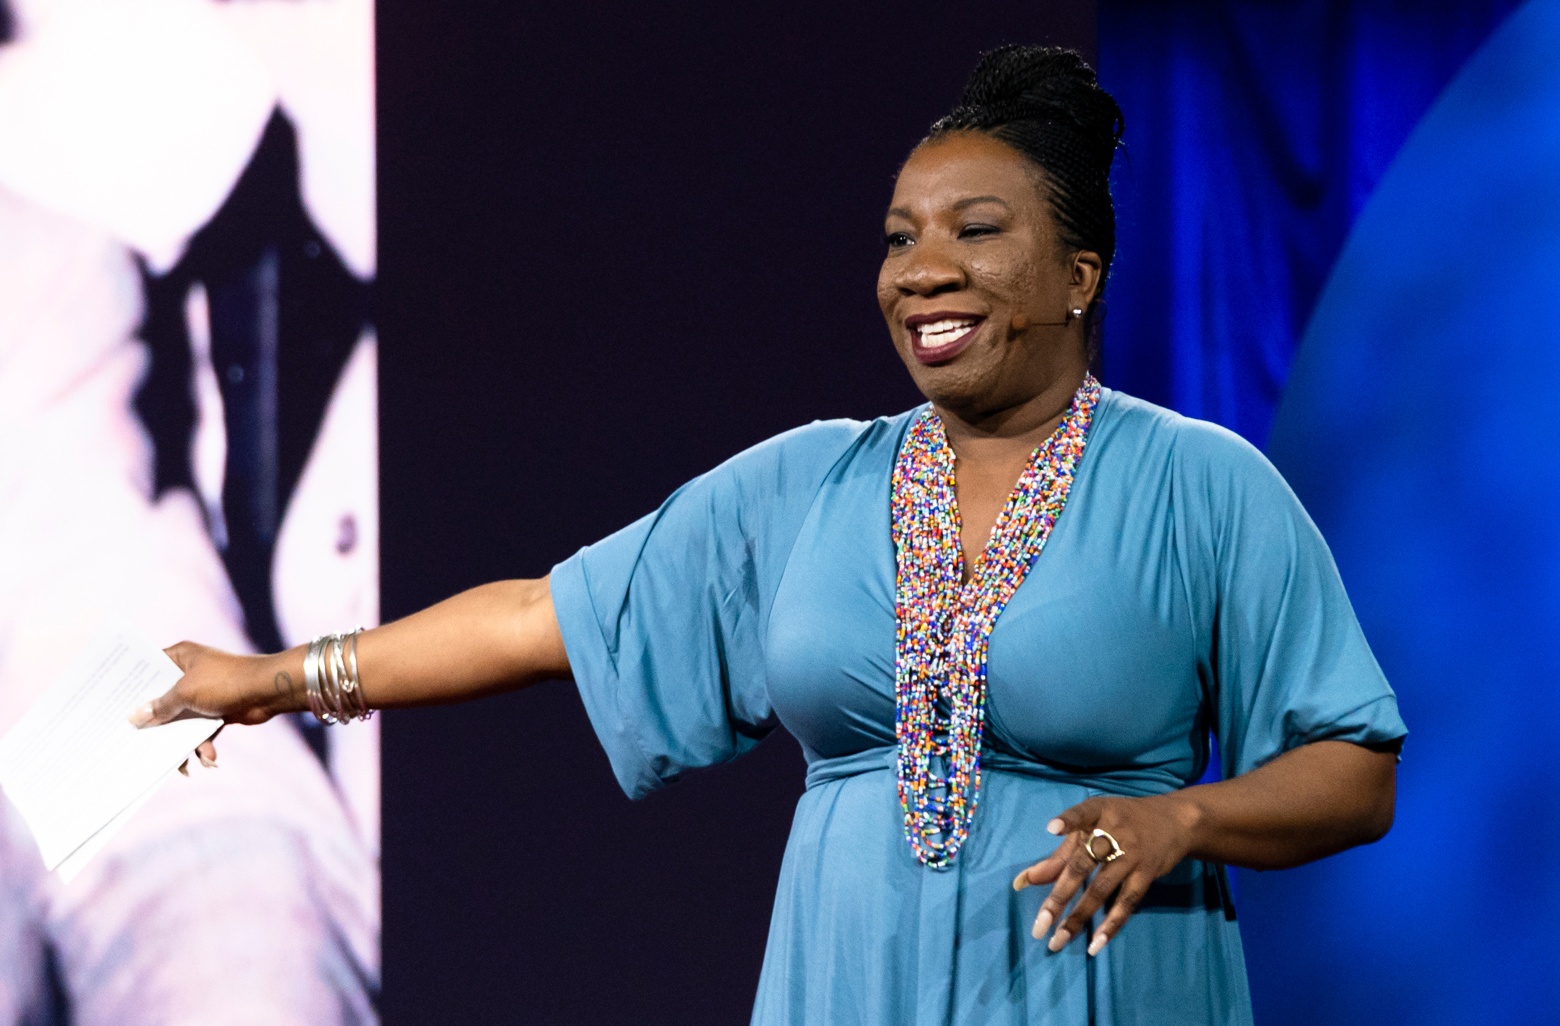 Tarana Burke gestures with one arm while speaking on a stage.